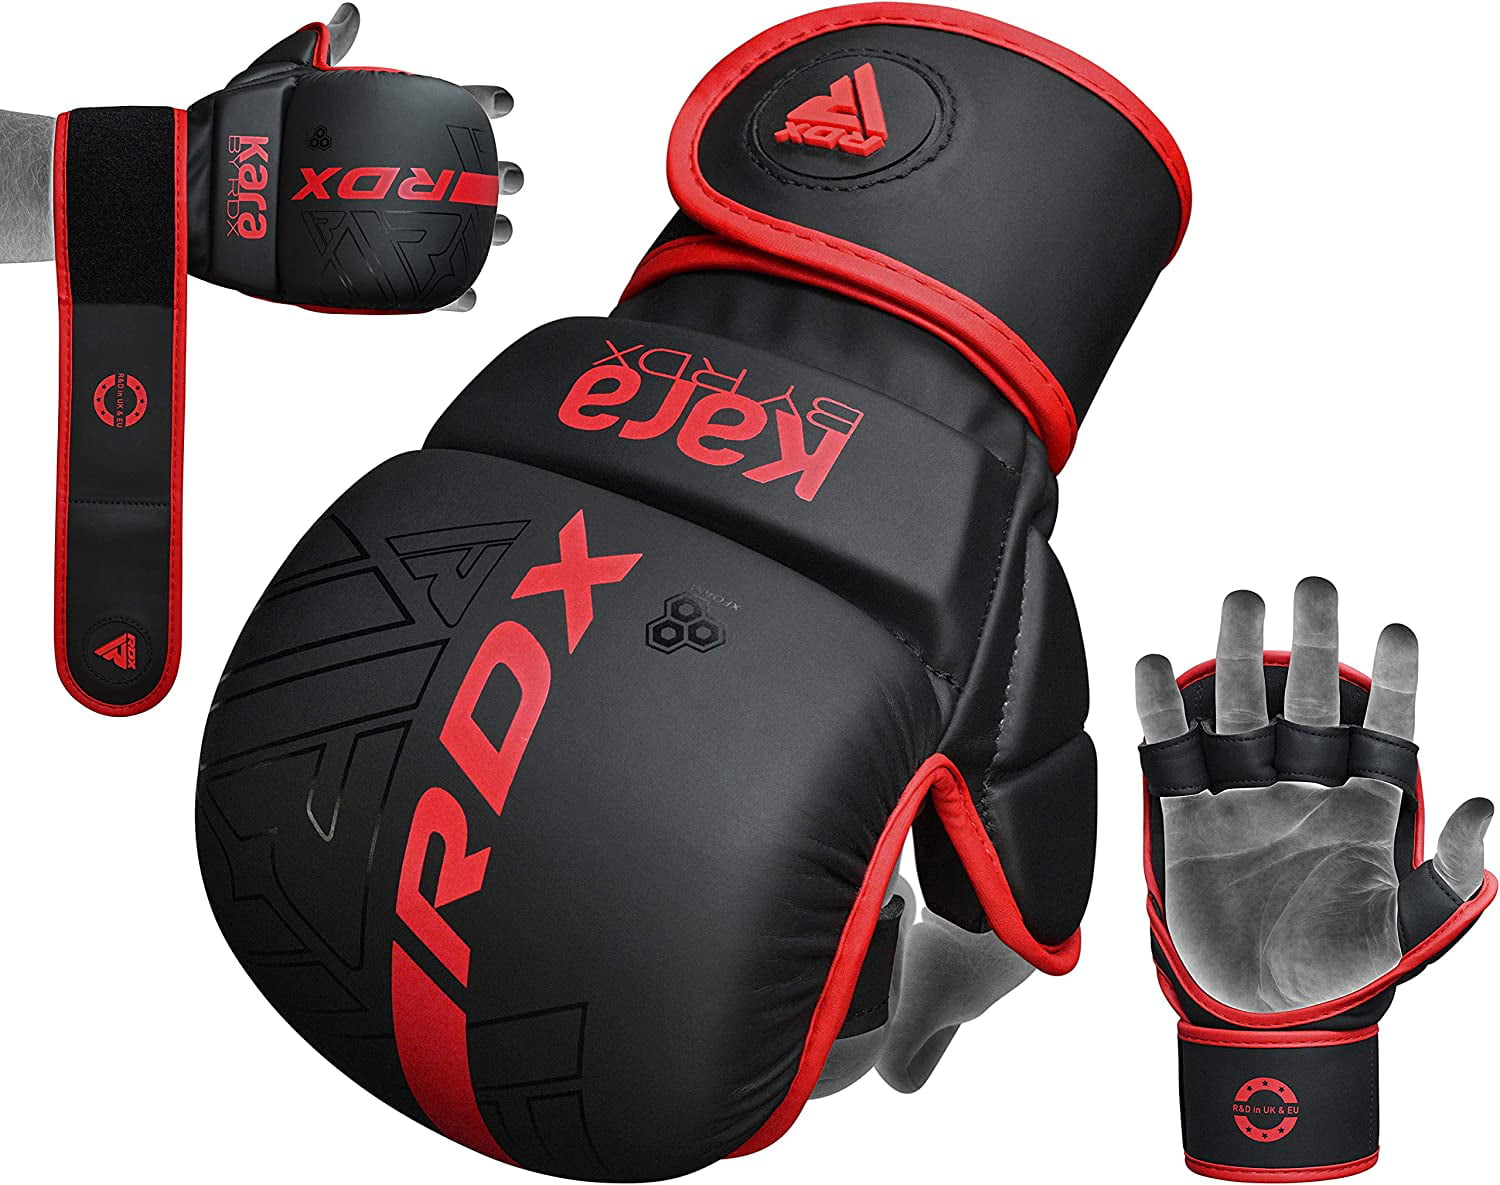 Open Palm Martial Arts Mitts Maya Hide Leather KARA Cage Gloves RDX MMA Gloves Grappling Sparring Punching Bag and Kickboxing Muay Thai Combat Sports Training